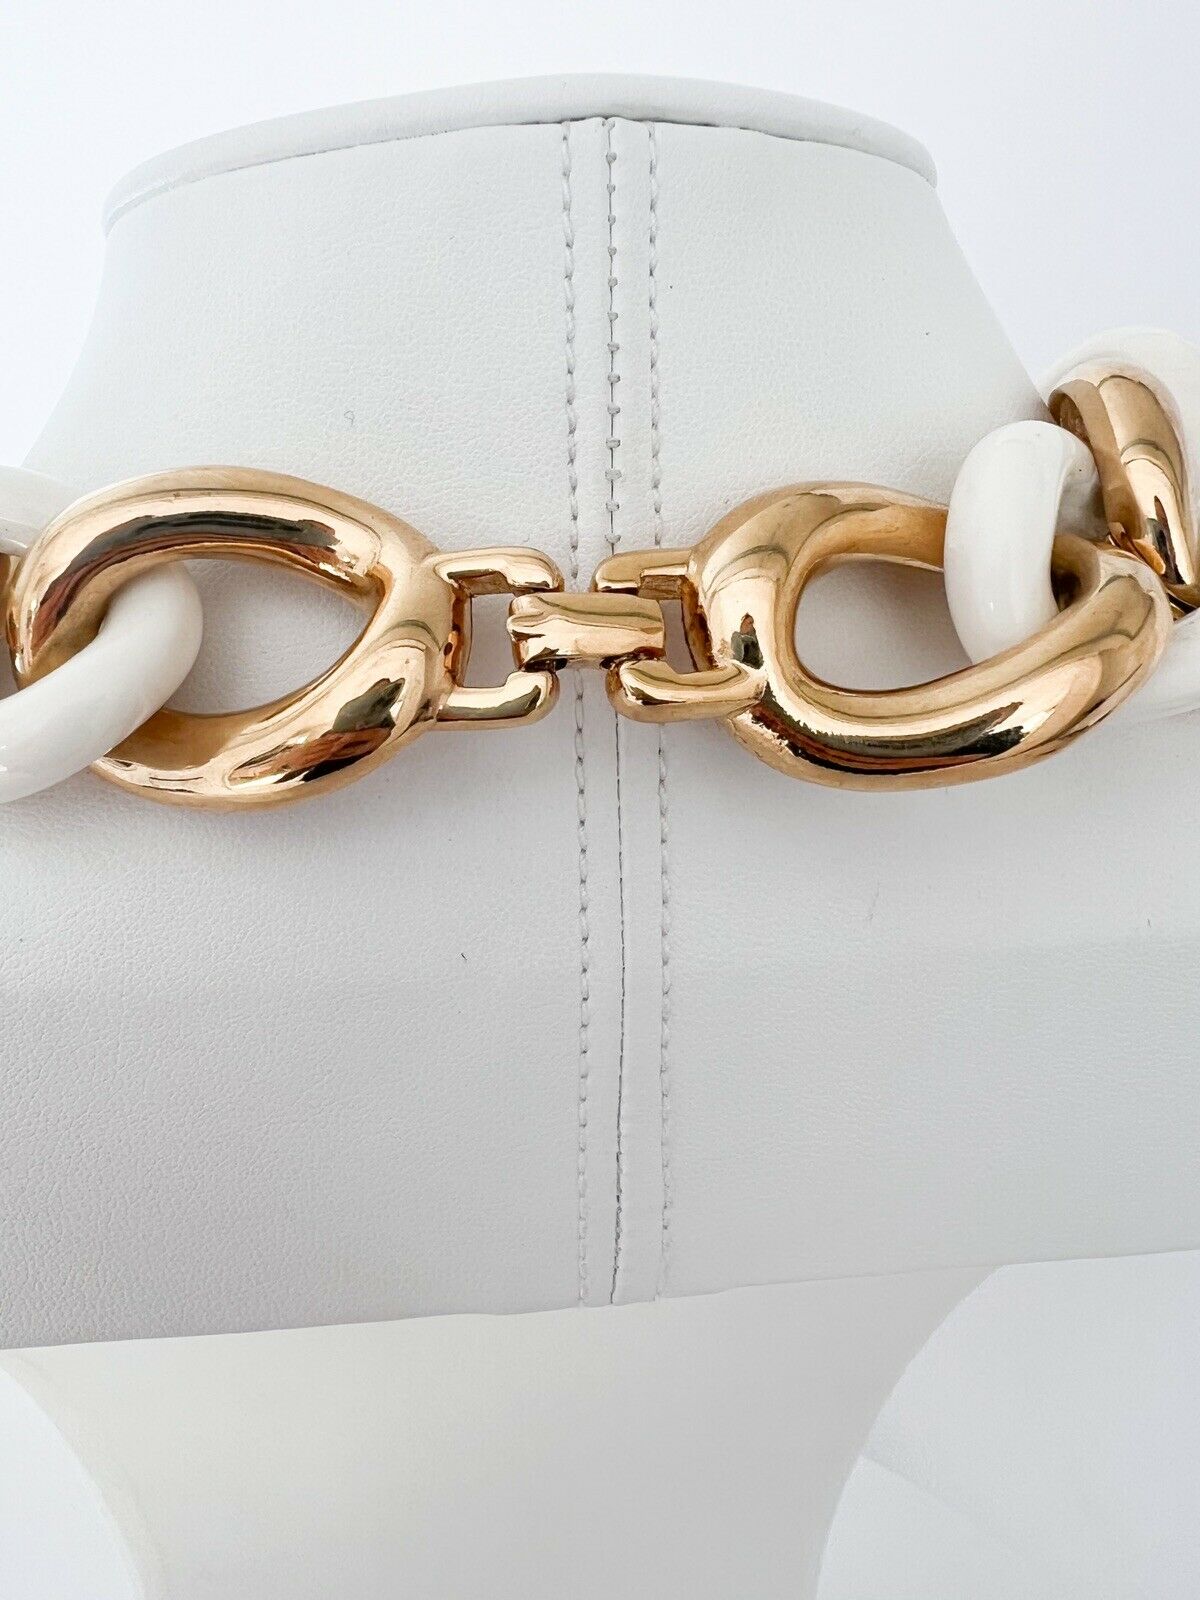 【SOLD OUT】Givenchy Vintage Gold Tone Choker Necklace Large Chain Link White